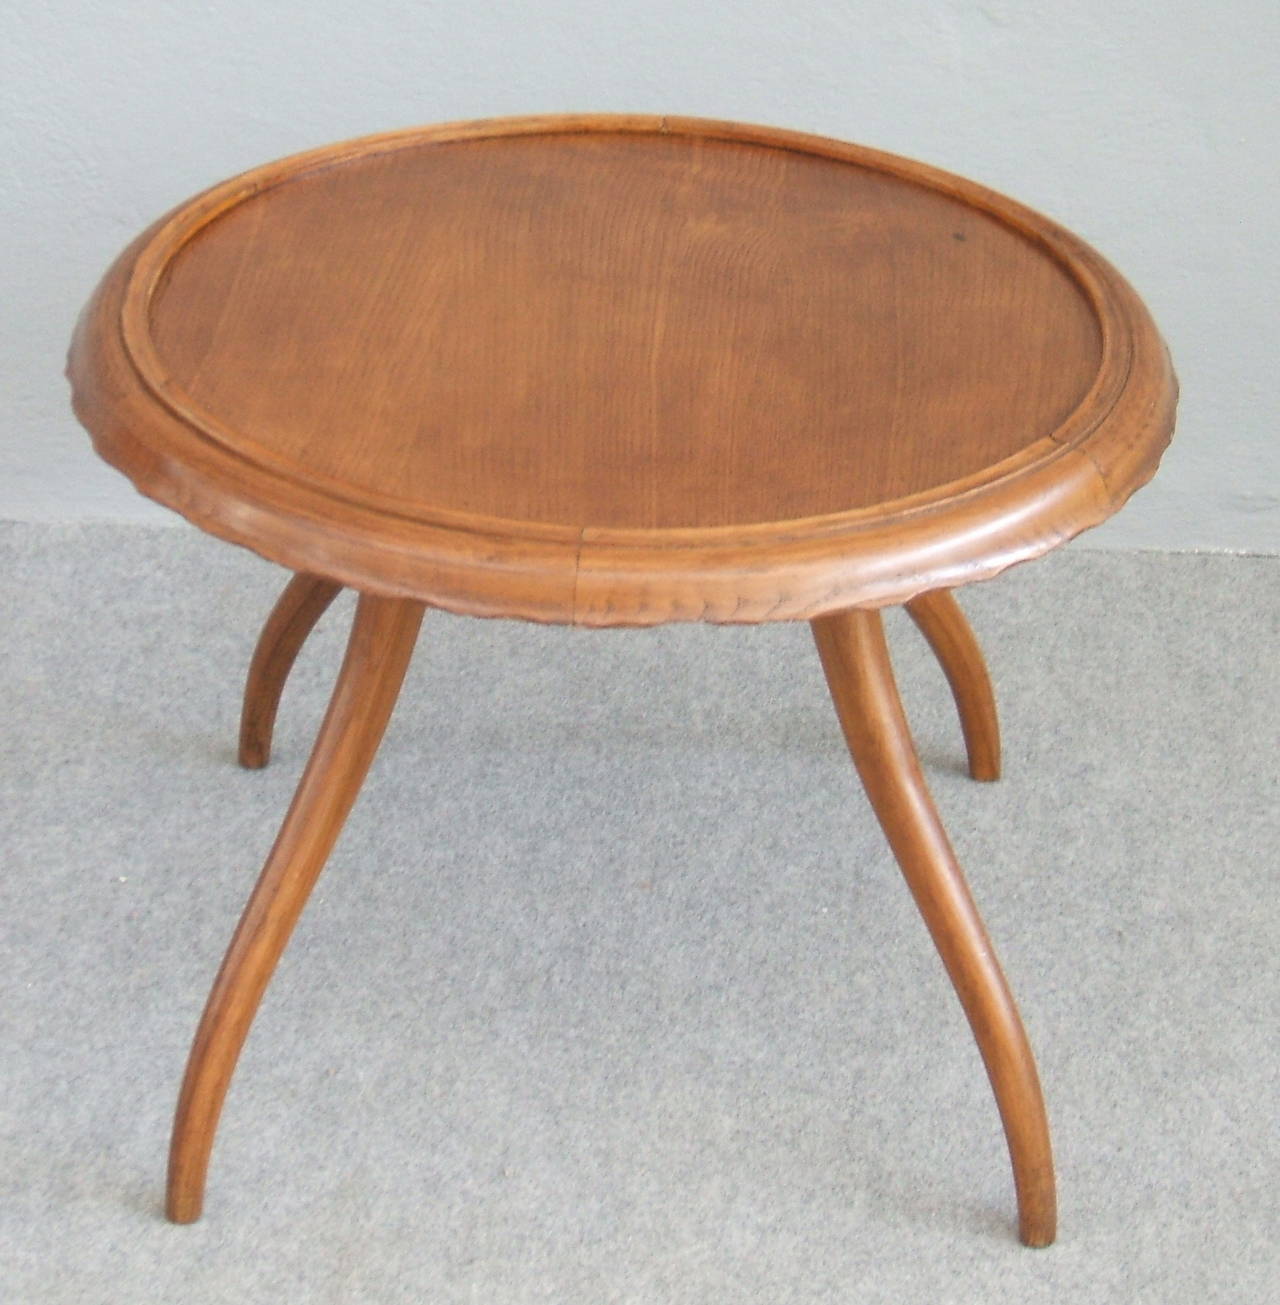 Very nice round side table attribuited to Osvaldo Borsani.
Bibl. Il mobile Deco by De Guttry